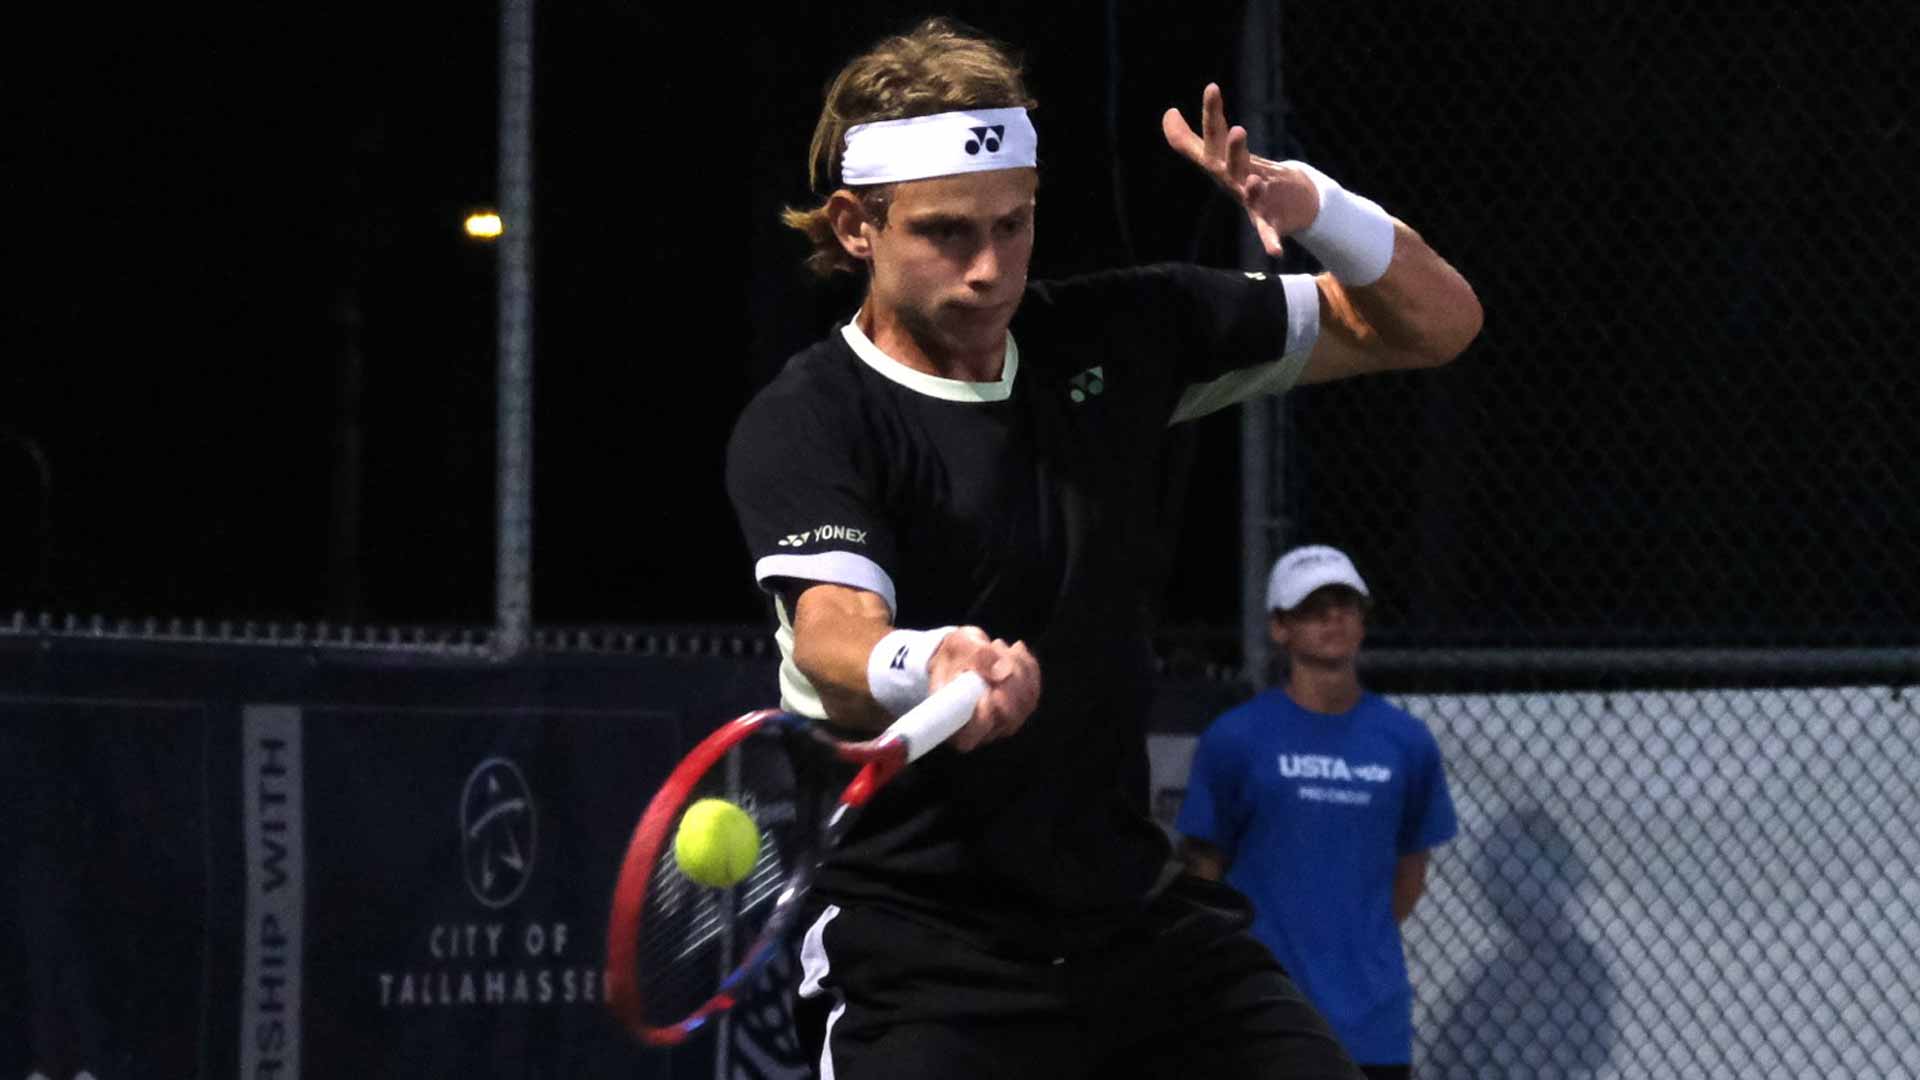 <a href='https://www.atptour.com/en/players/zizou-bergs/bu13/overview'>Zizou Bergs</a> wins the <a href='https://www.atptour.com/en/scores/archive/tallahassee/692/2024/results'>Tallahassee Tennis Challenger</a> for a second consecutive year.